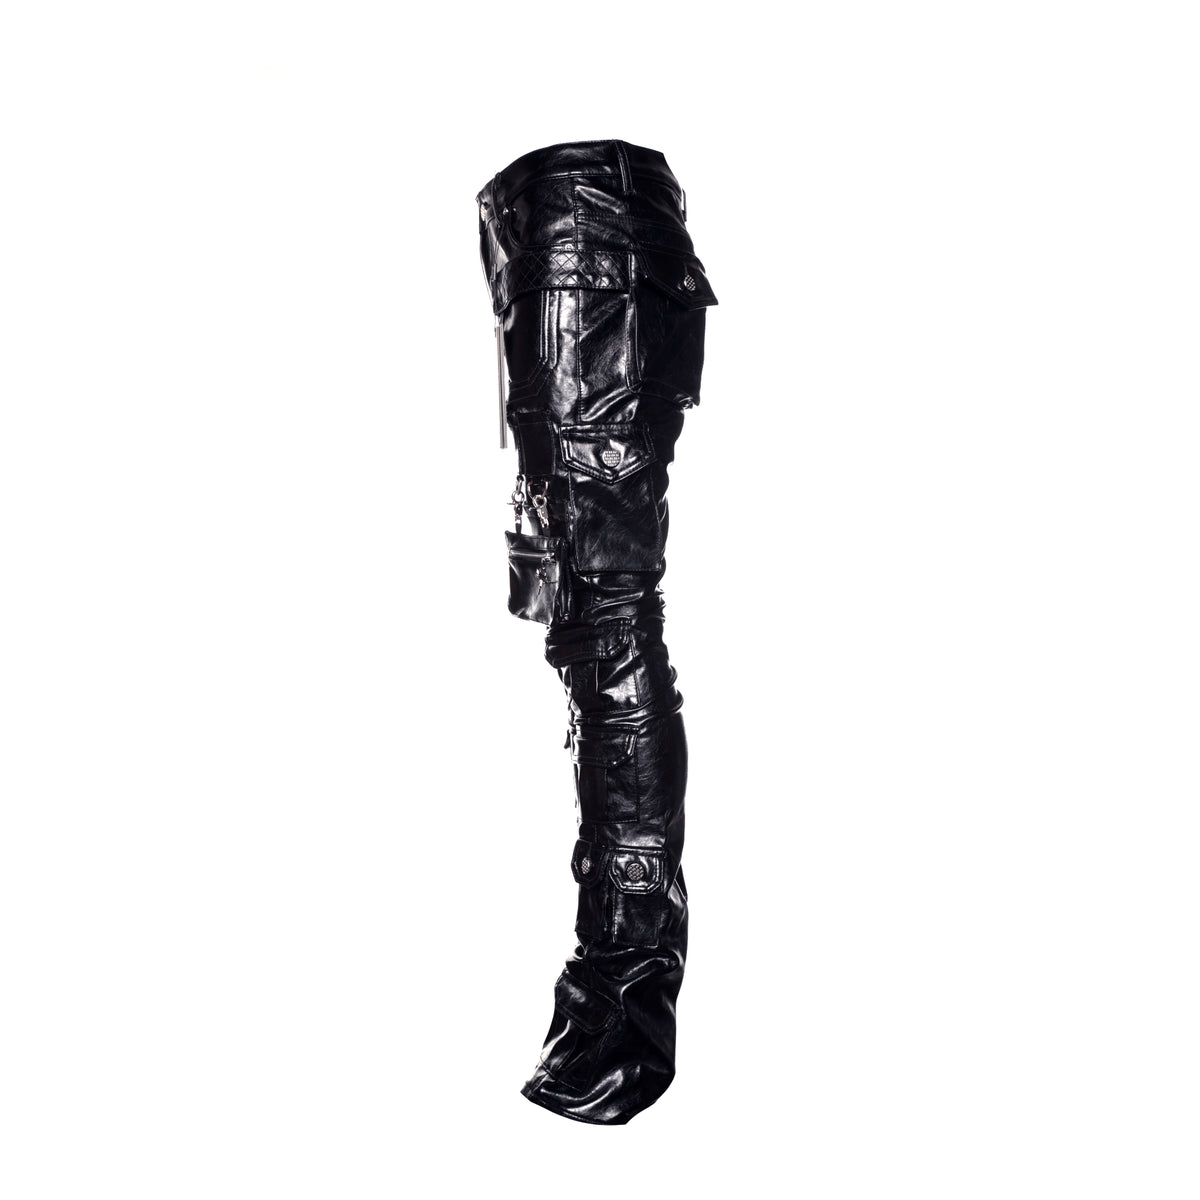 Guapi Obsidian Black Tactical Men's Leather Stacked Pants - SIZE Boutique